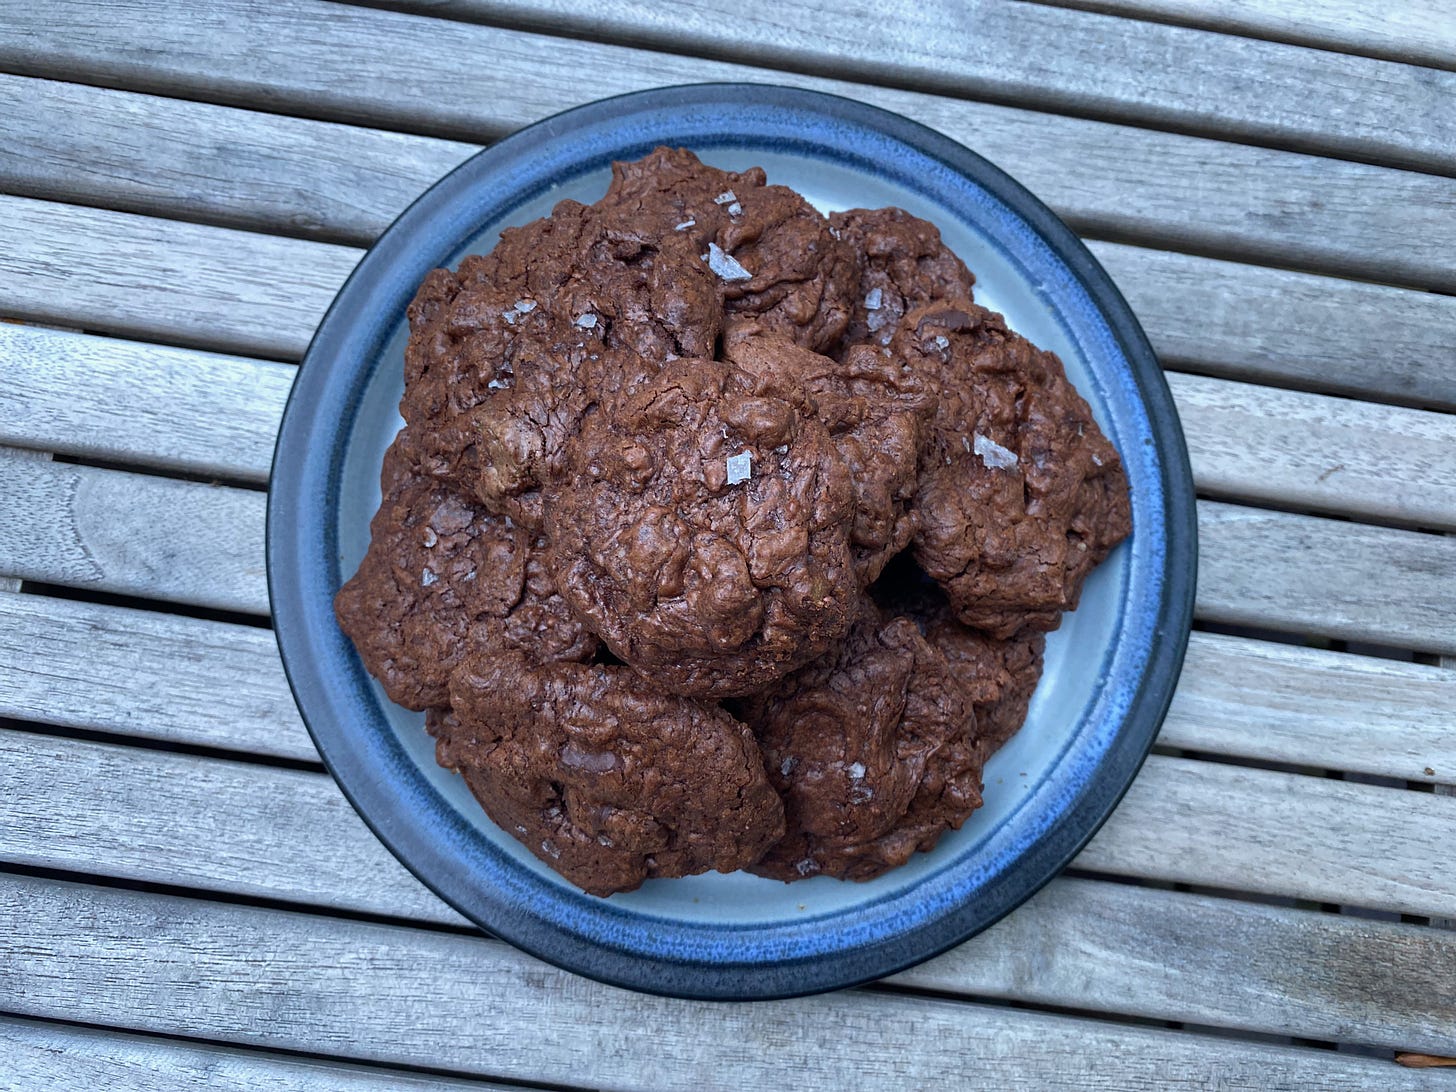 A plate of crinkly chocolate cookies on an outdoor table.